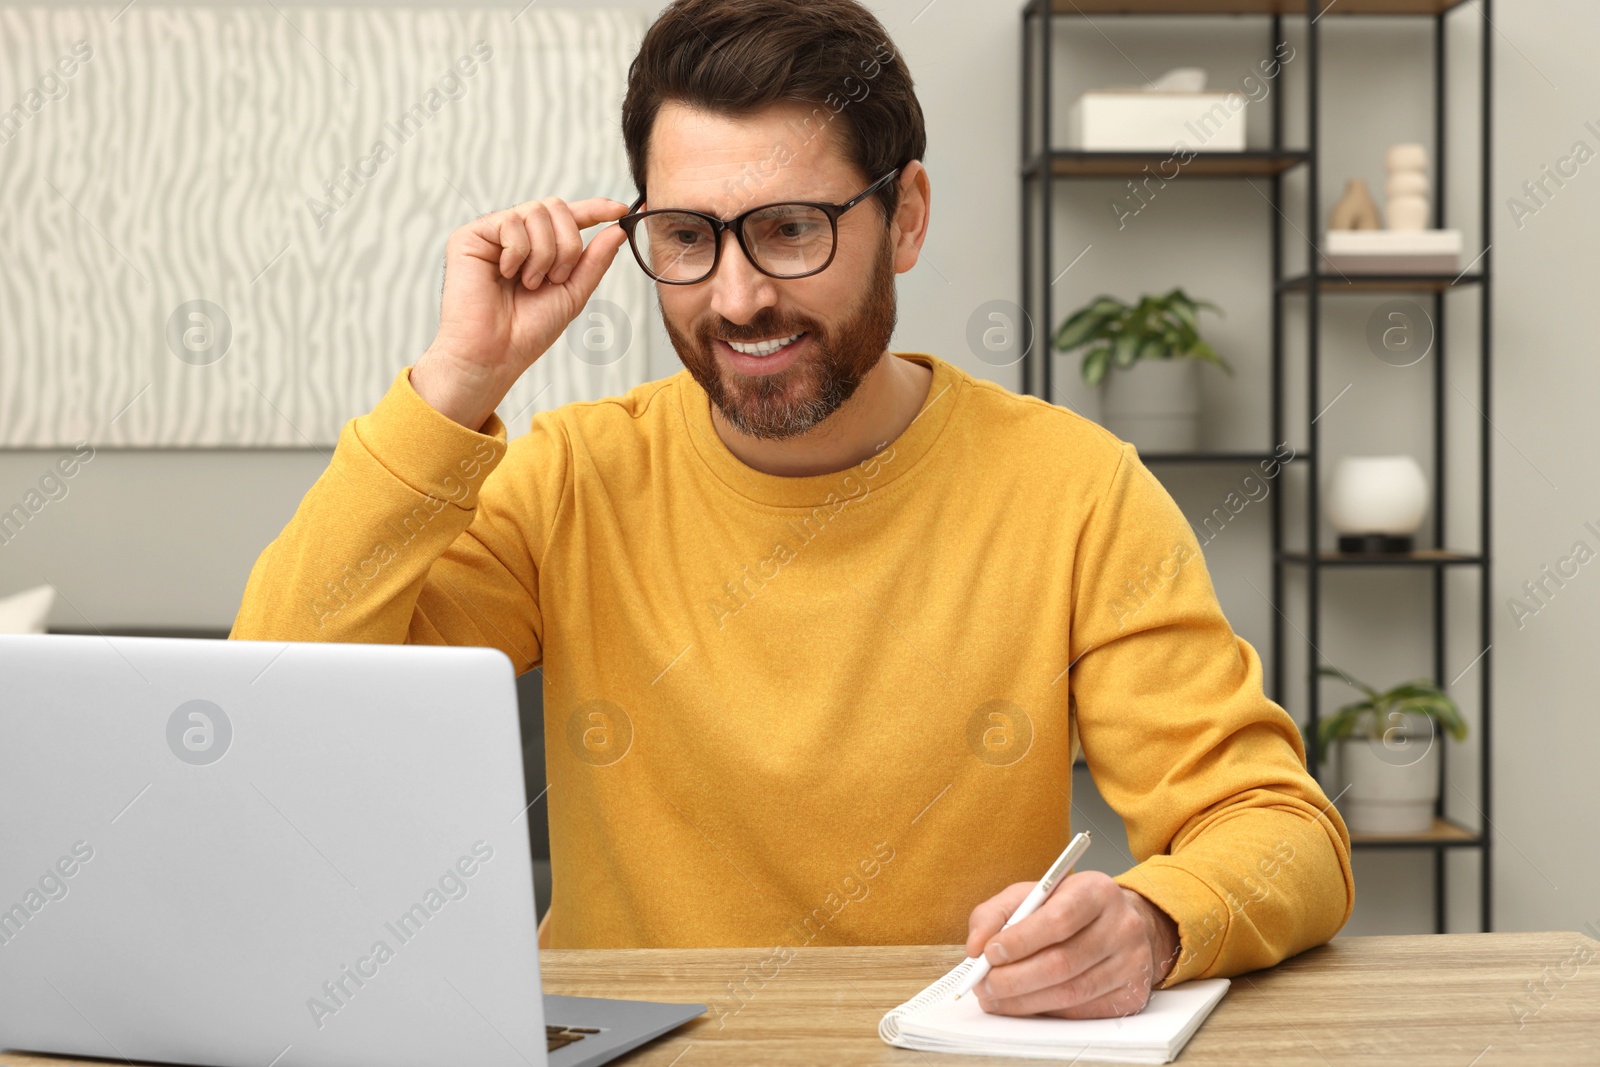 Photo of Man using laptop and writing something in notebook at wooden table indoors